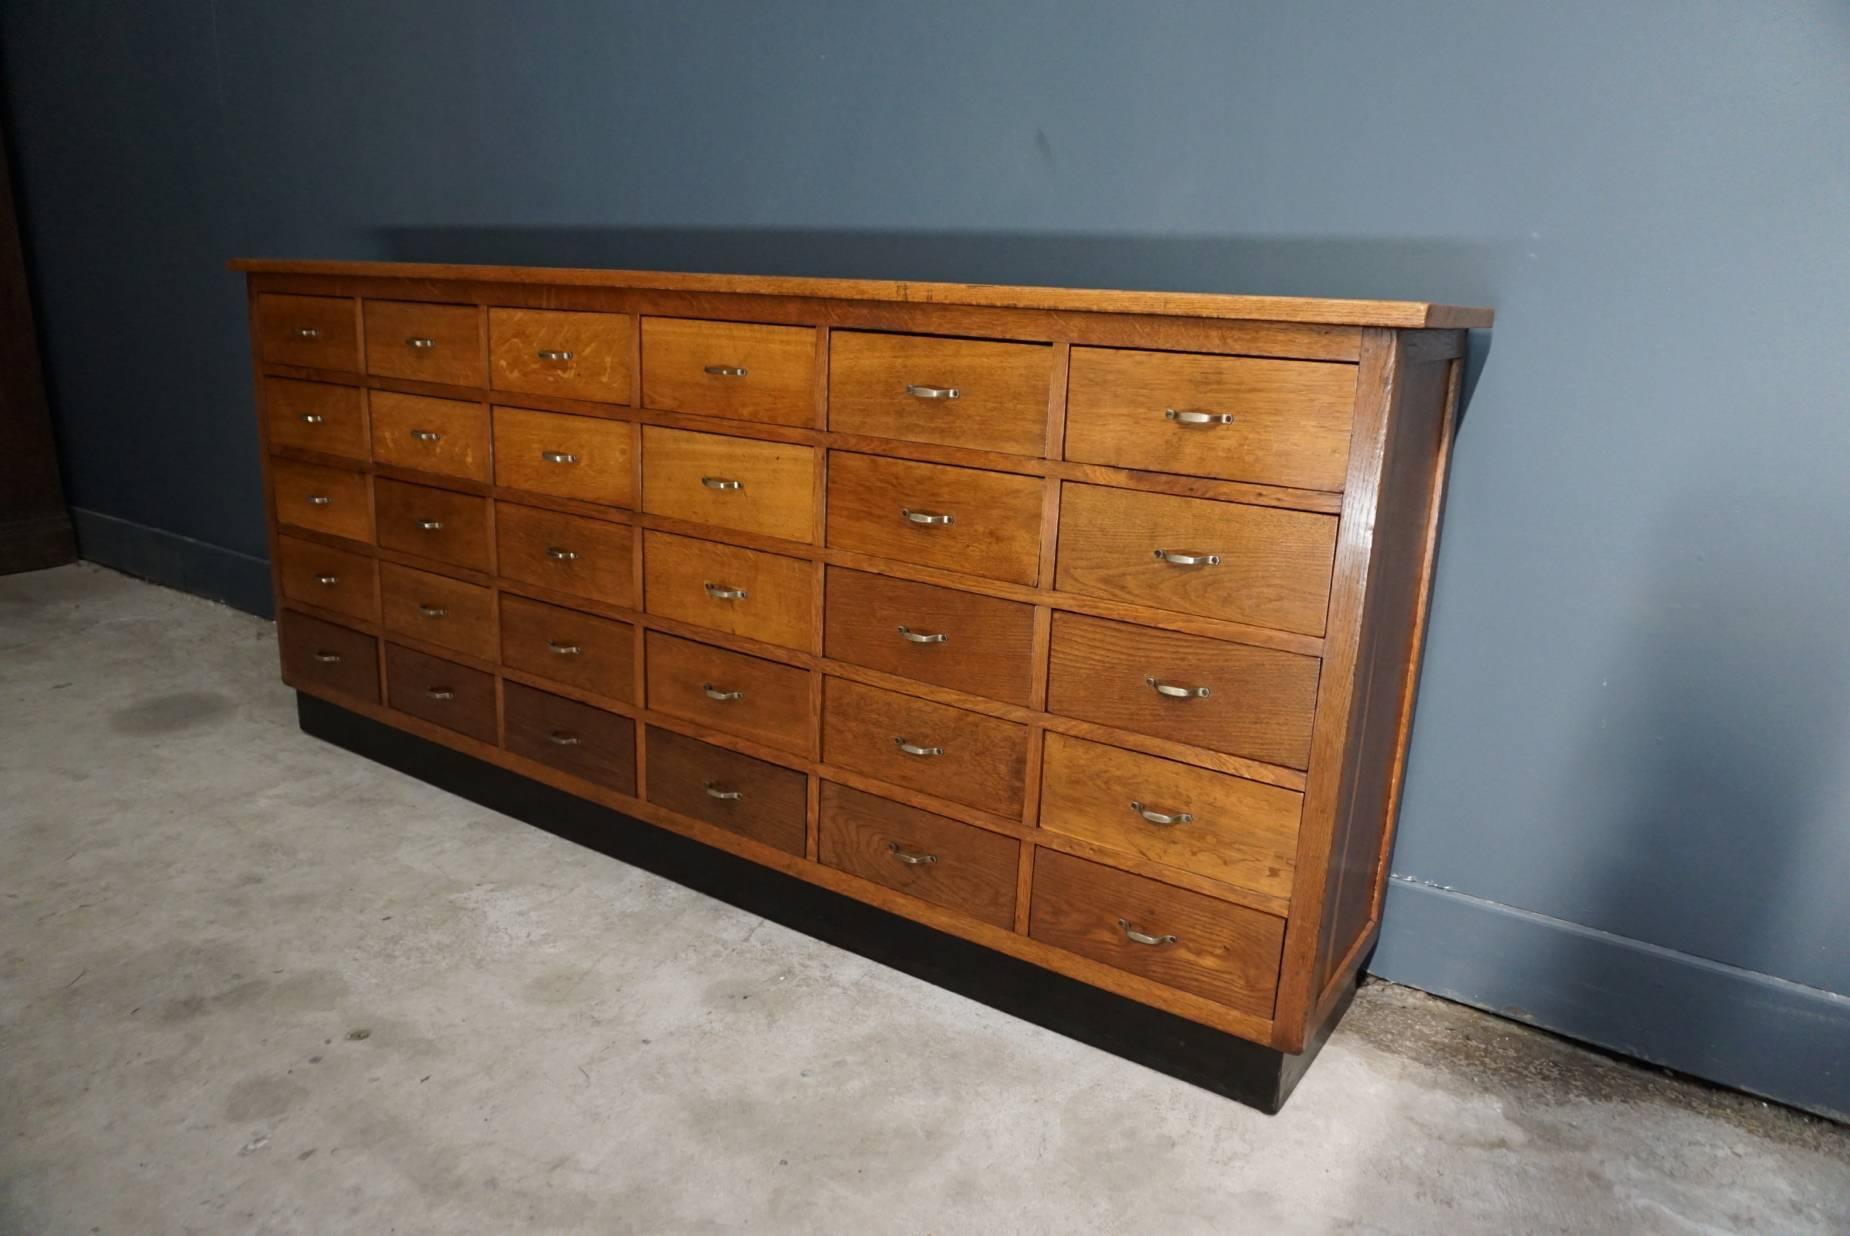 This oak apothecary cabinet was designed and made, circa 1950 in the Netherlands. It features 30 drawers with metal hardware. The inside of the drawers measure: 28 x 28.5 x 11 cm.